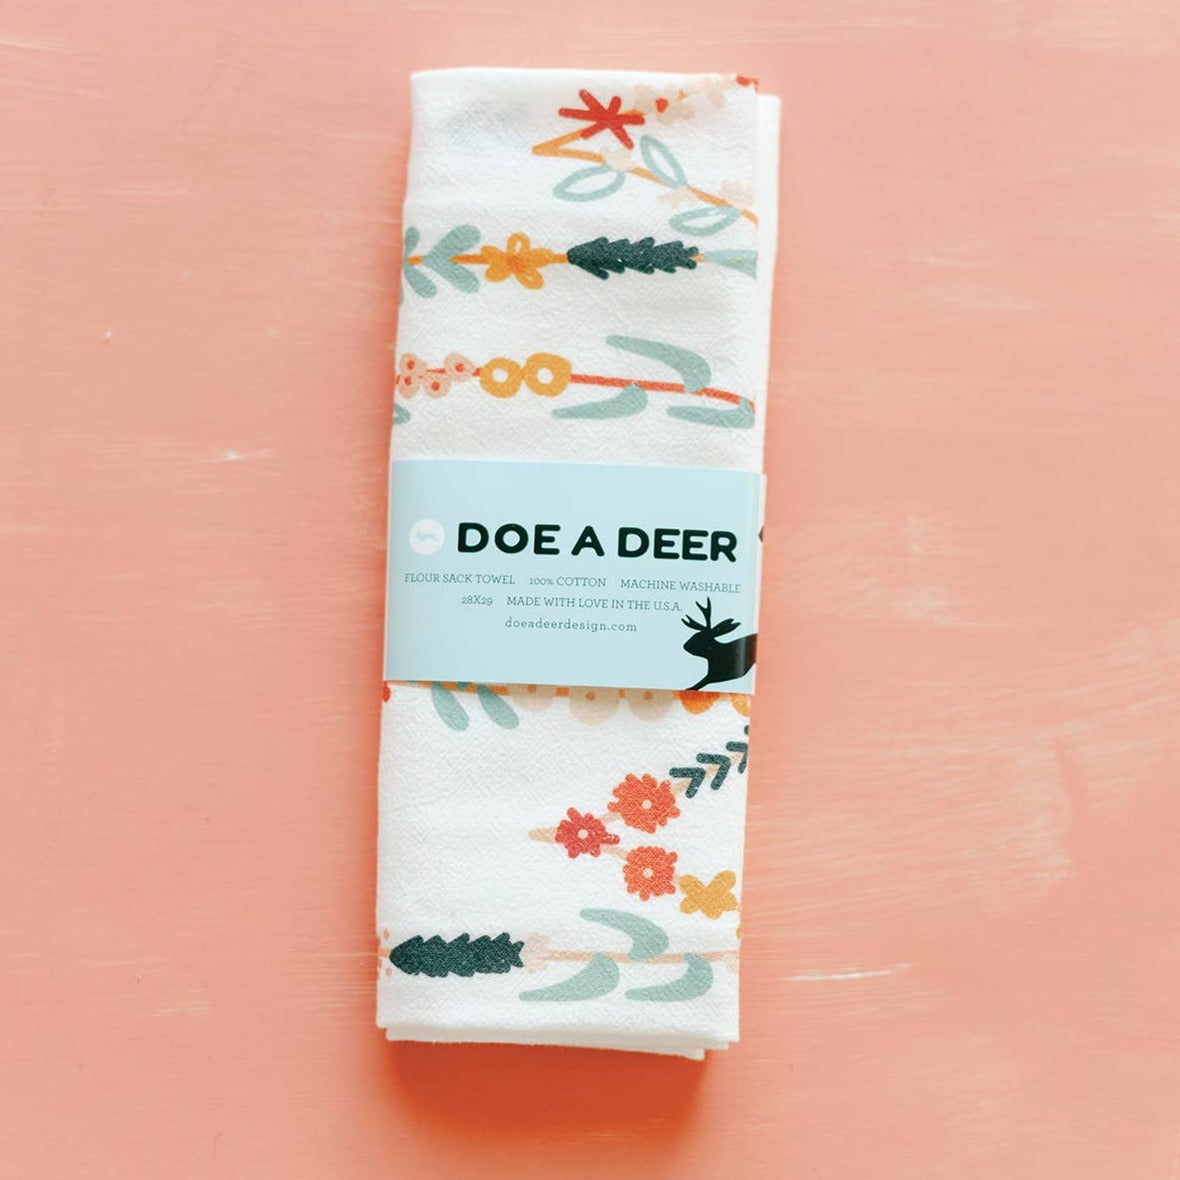 This mother's day kitchen towel is ready for gifting.